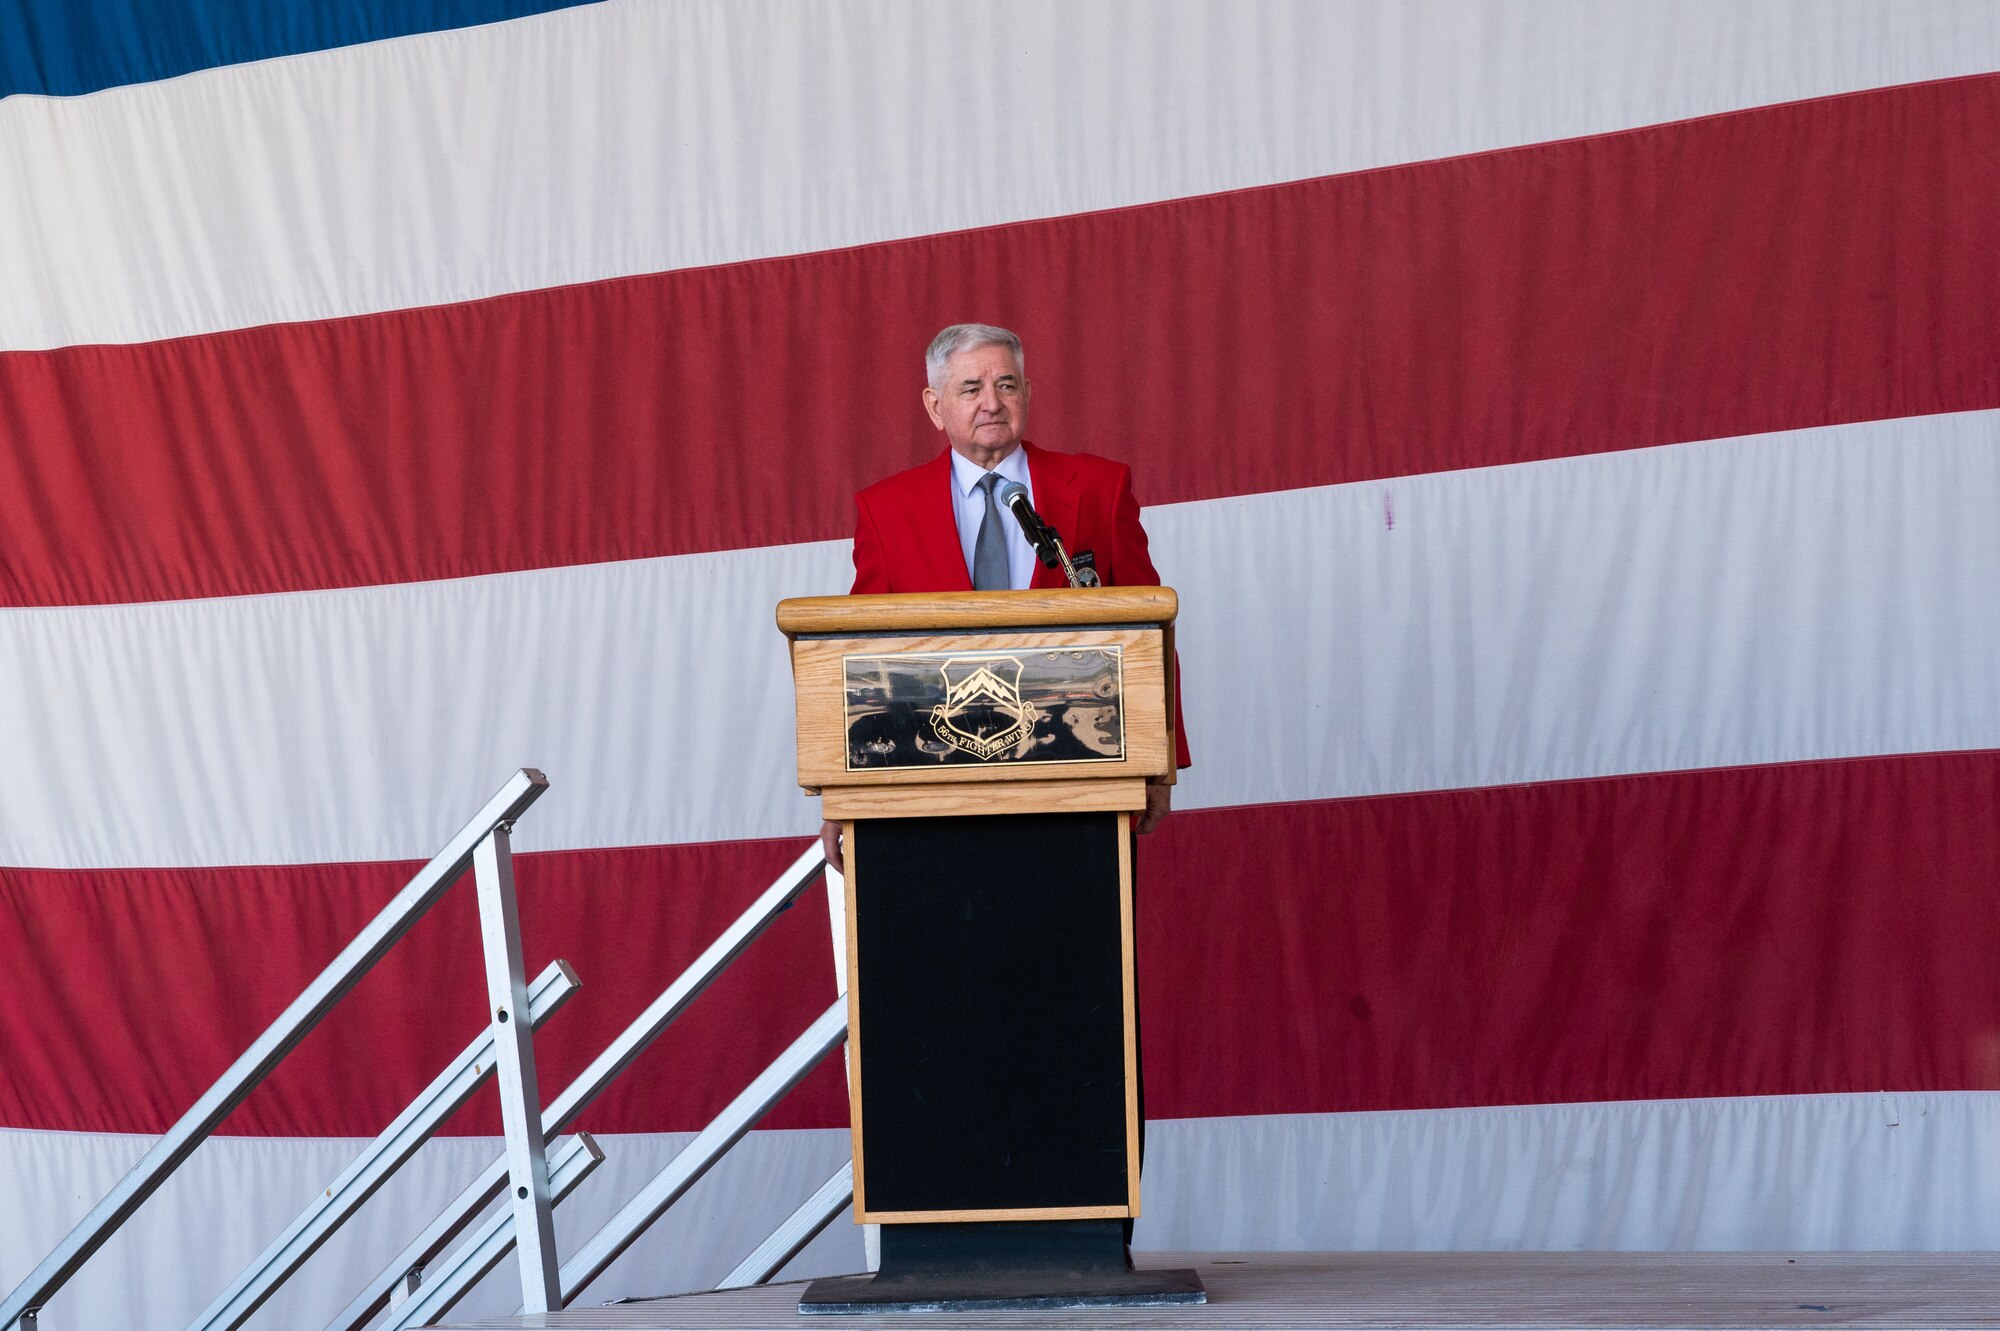 Retired U.S. Air Force Chief of Staff Gen. Ronald R. Fogleman, speaks at the 9th Annual Tuskegee Airmen Commemoration Day celebration March 24, 2022, at Luke Air Force Base, Arizona.